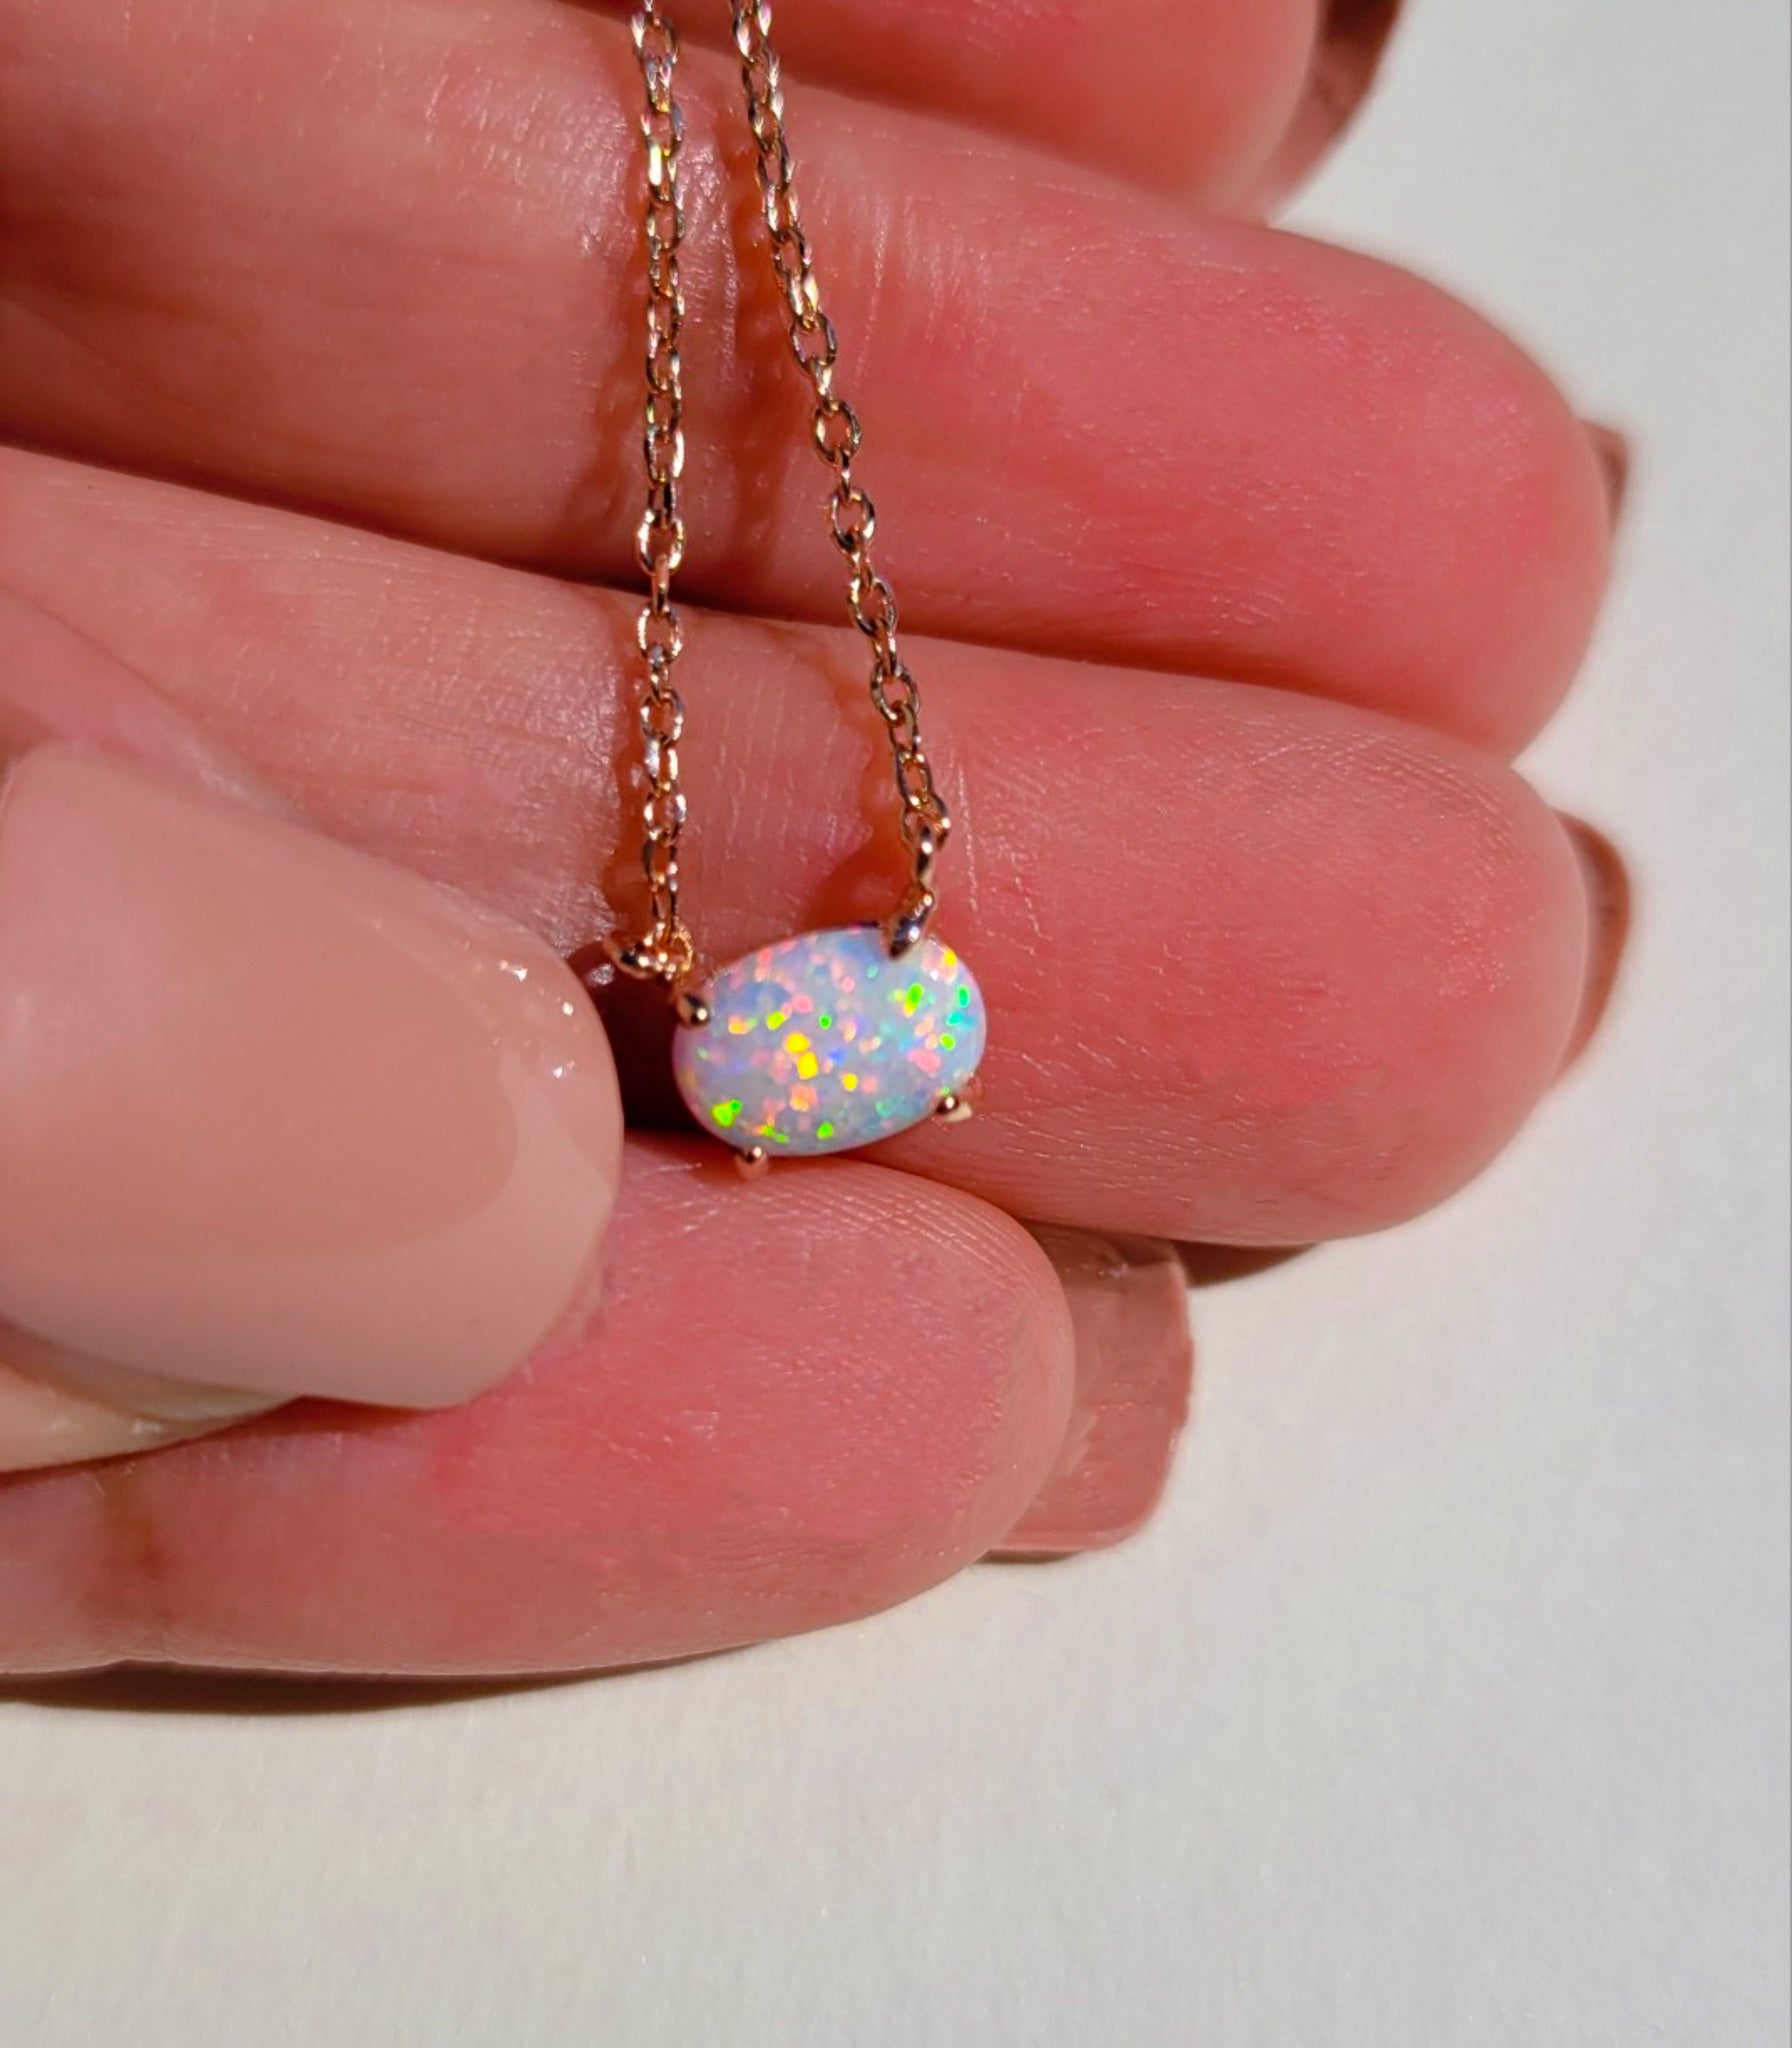 Paola Opal Rose Gold Necklace